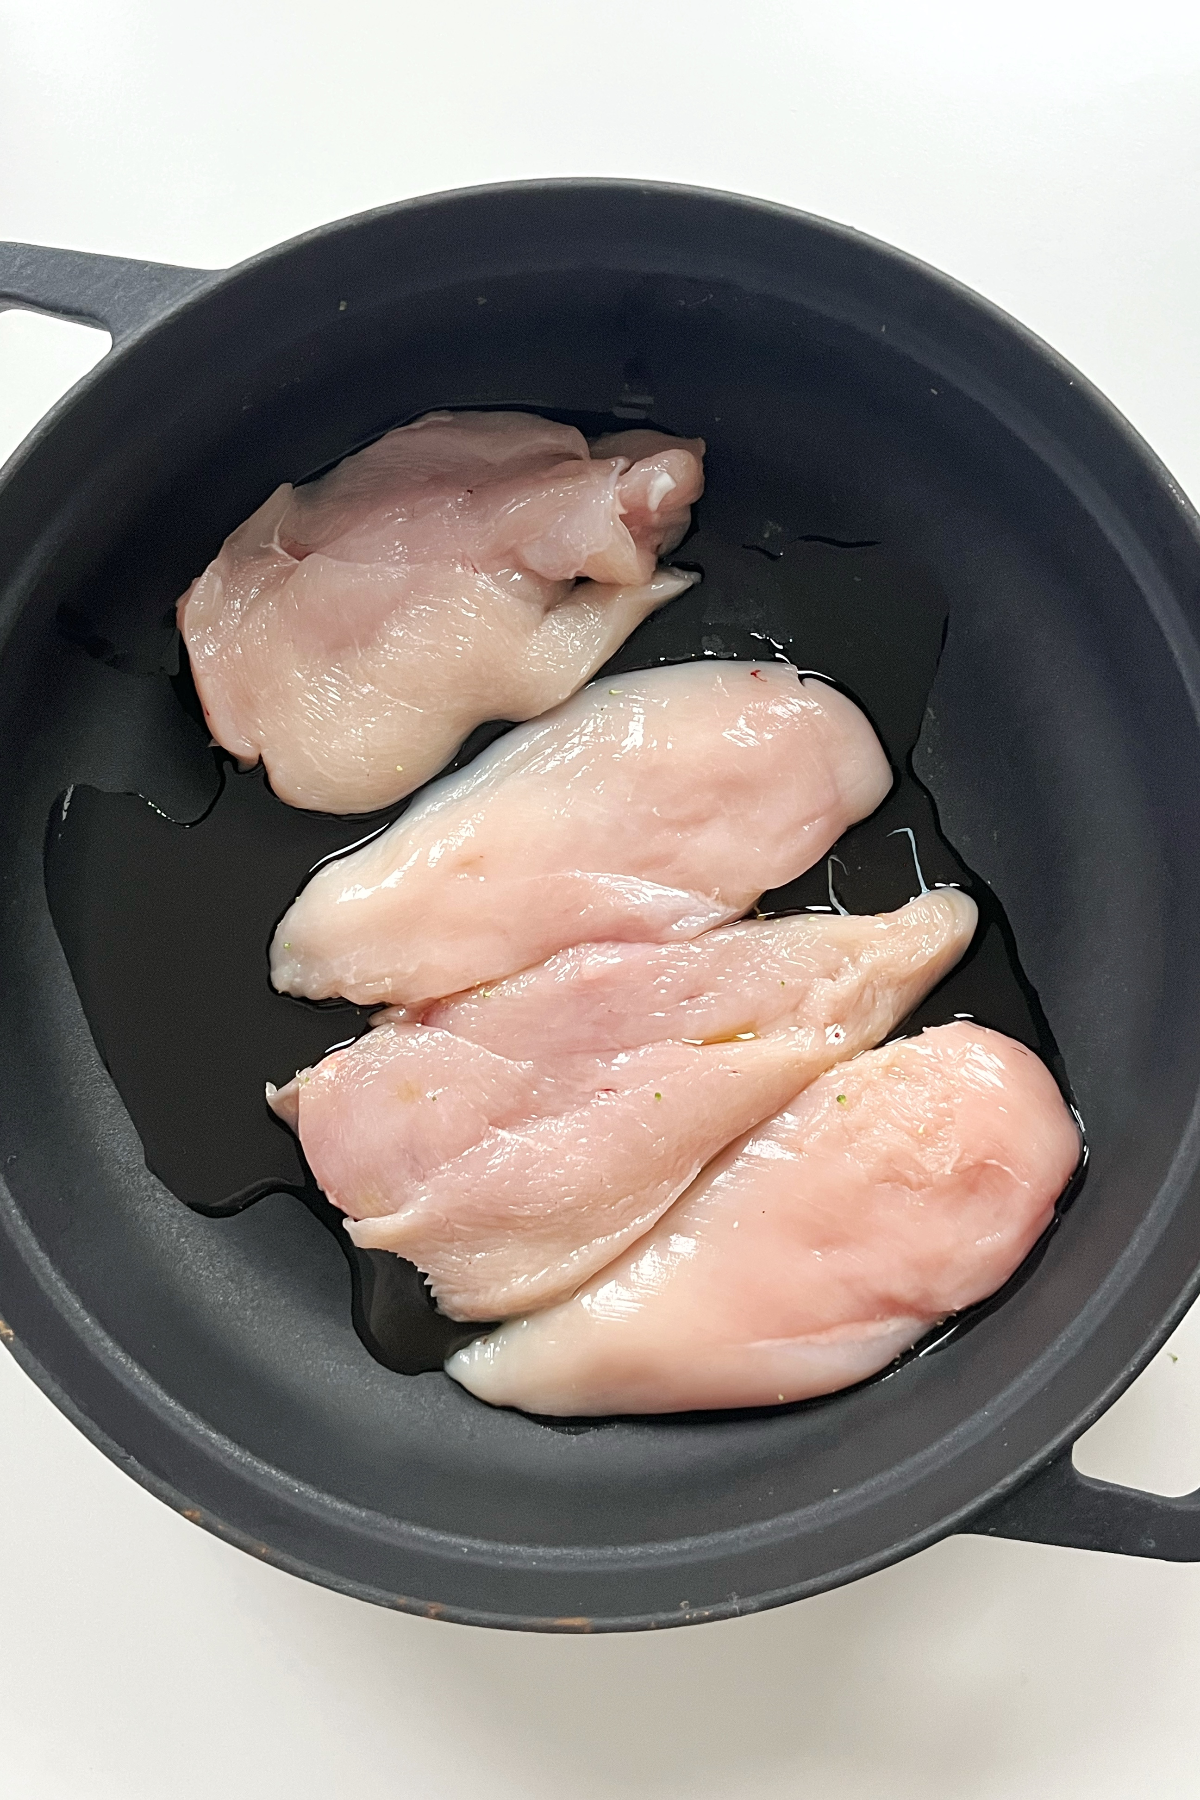 Black pan with 4 pieces of chicken inside. 